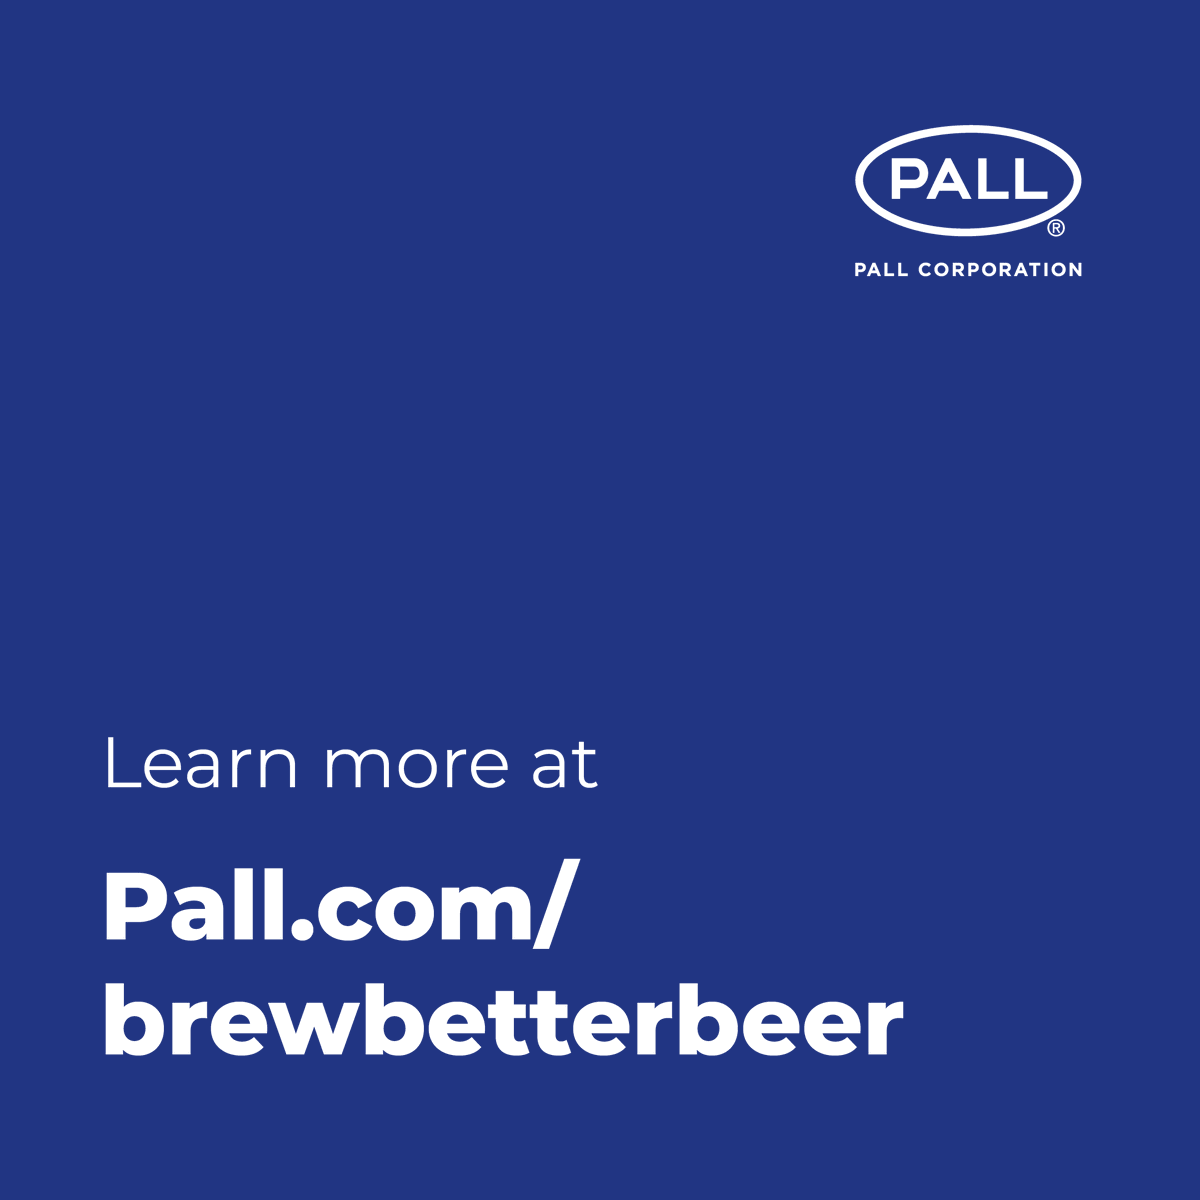 What do beer drinkers think about sustainable brewing practices? Download our survey results to find out: bit.ly/3uFdhX4.